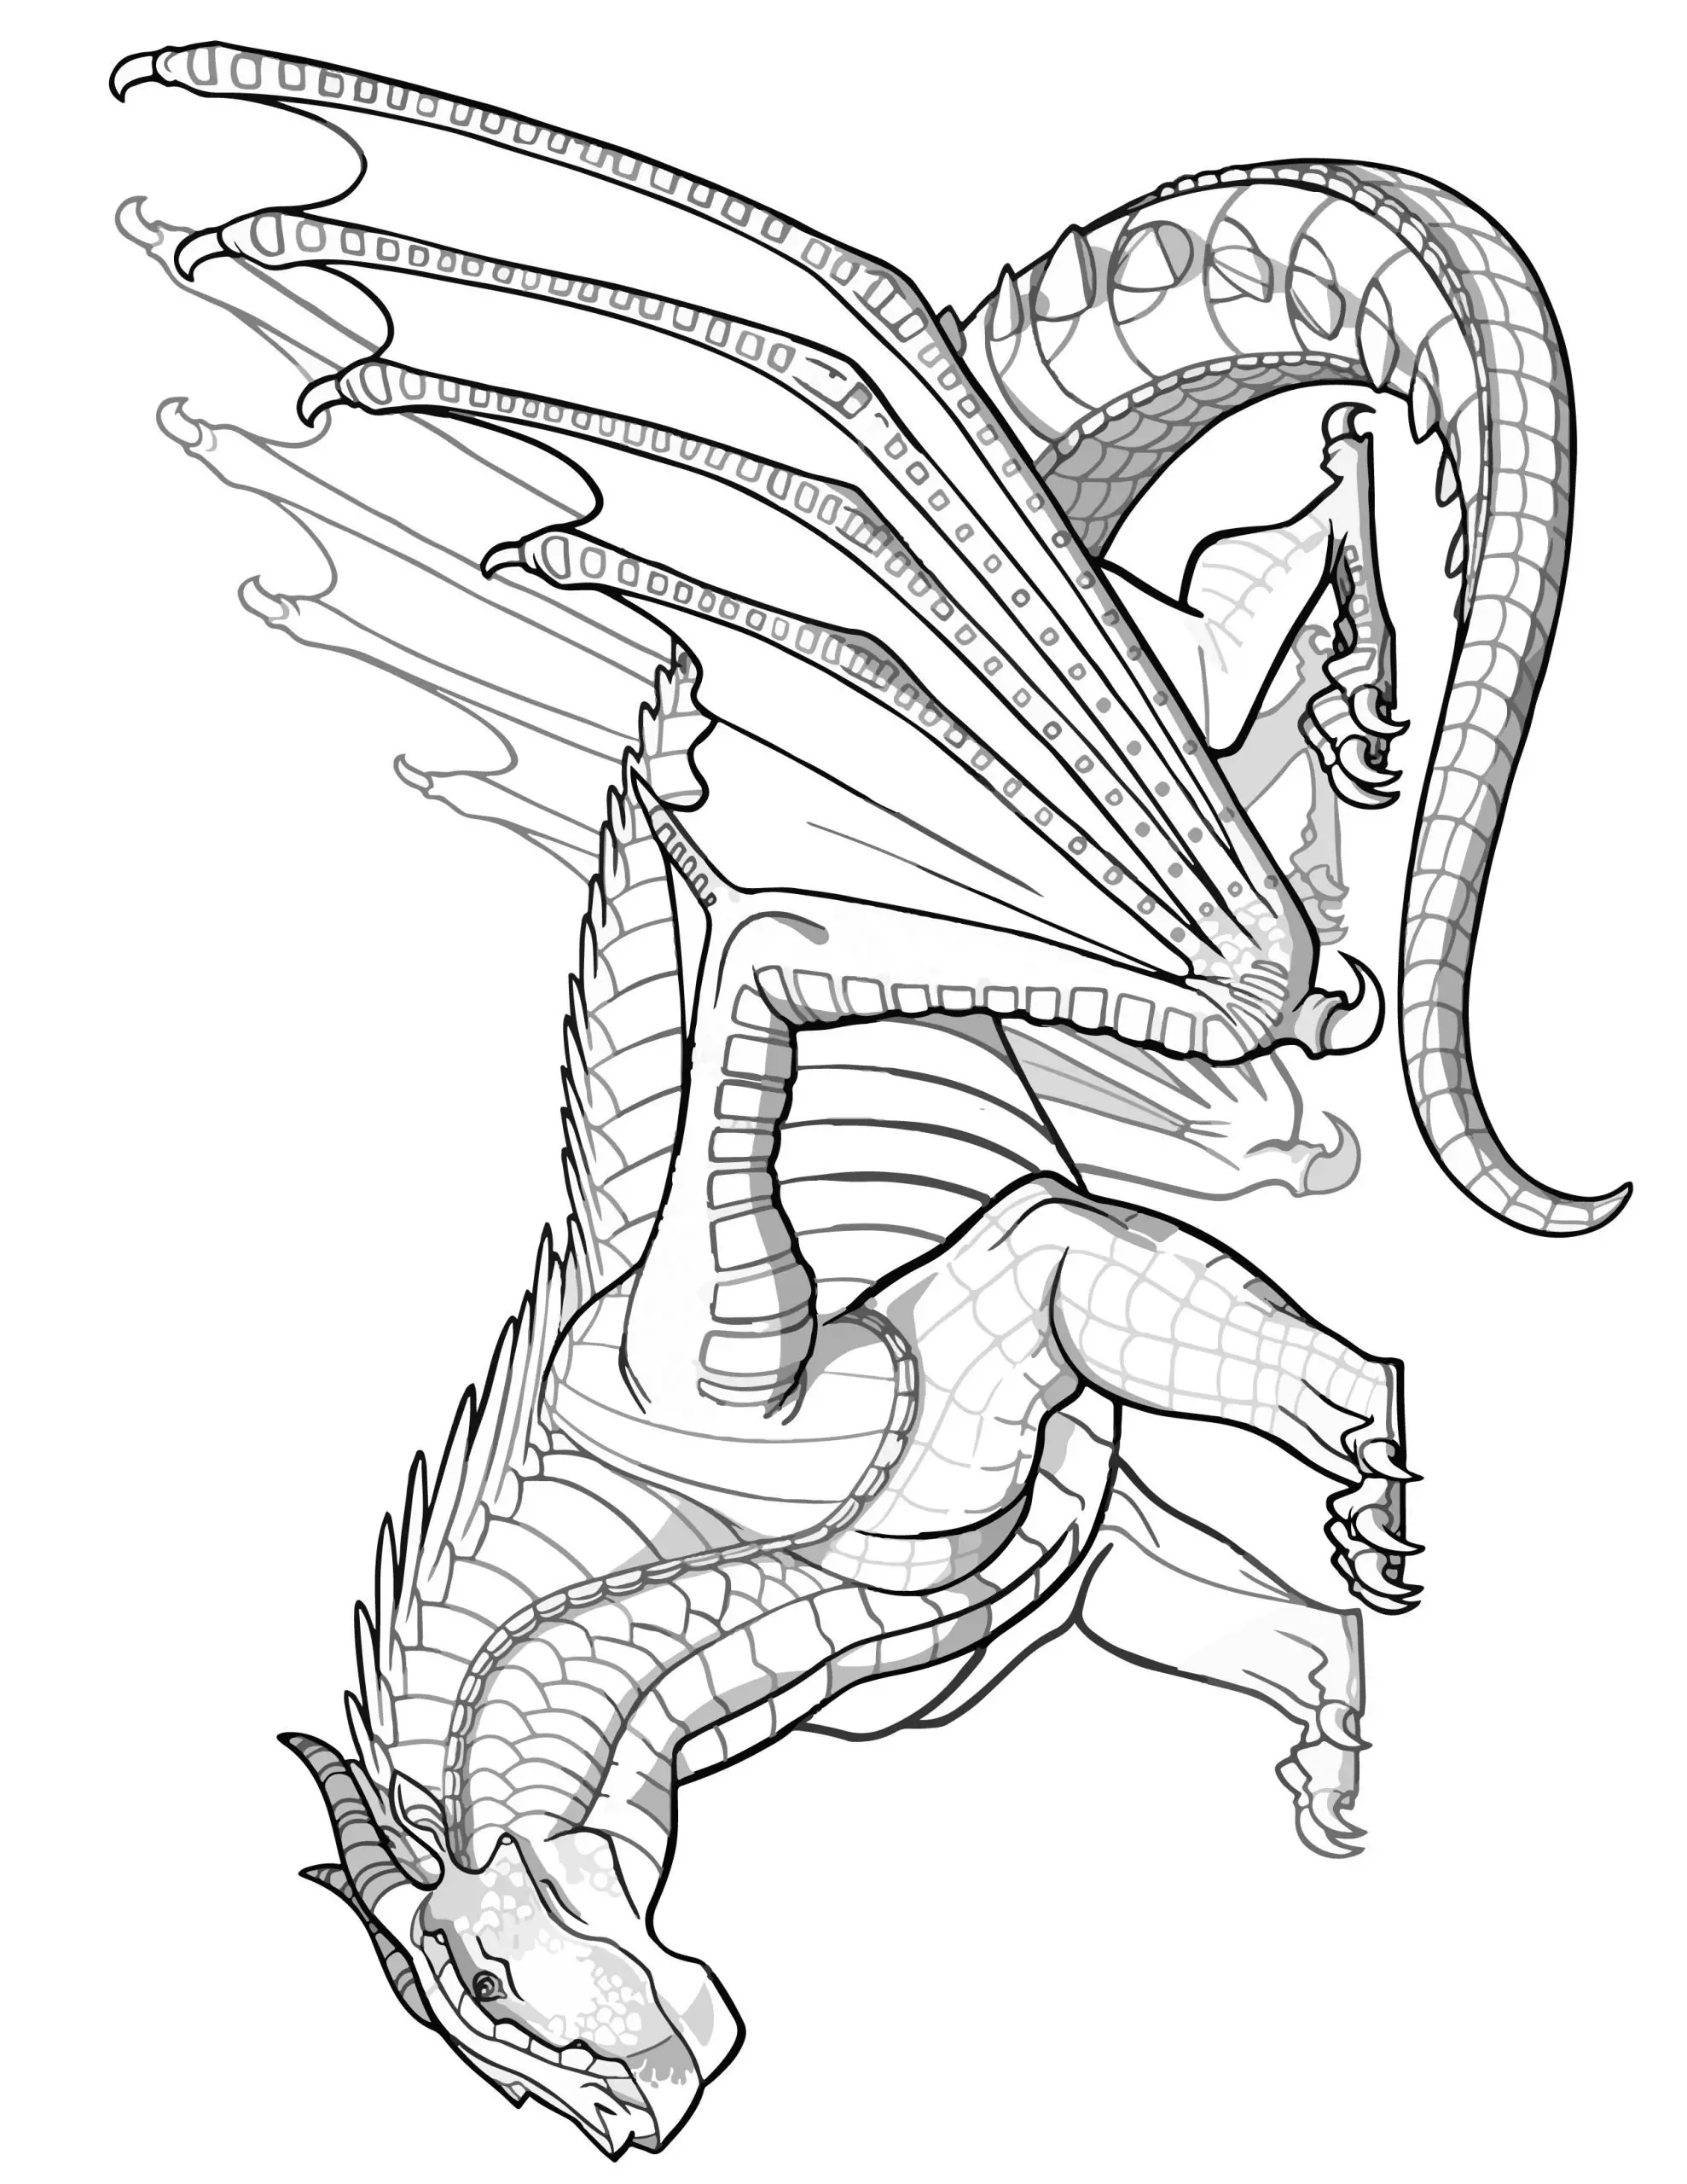 MUDWING DRAGON Coloring Page Transparent Wings of Fire Coloring SHEET Pyrrhian Dragon Tribe